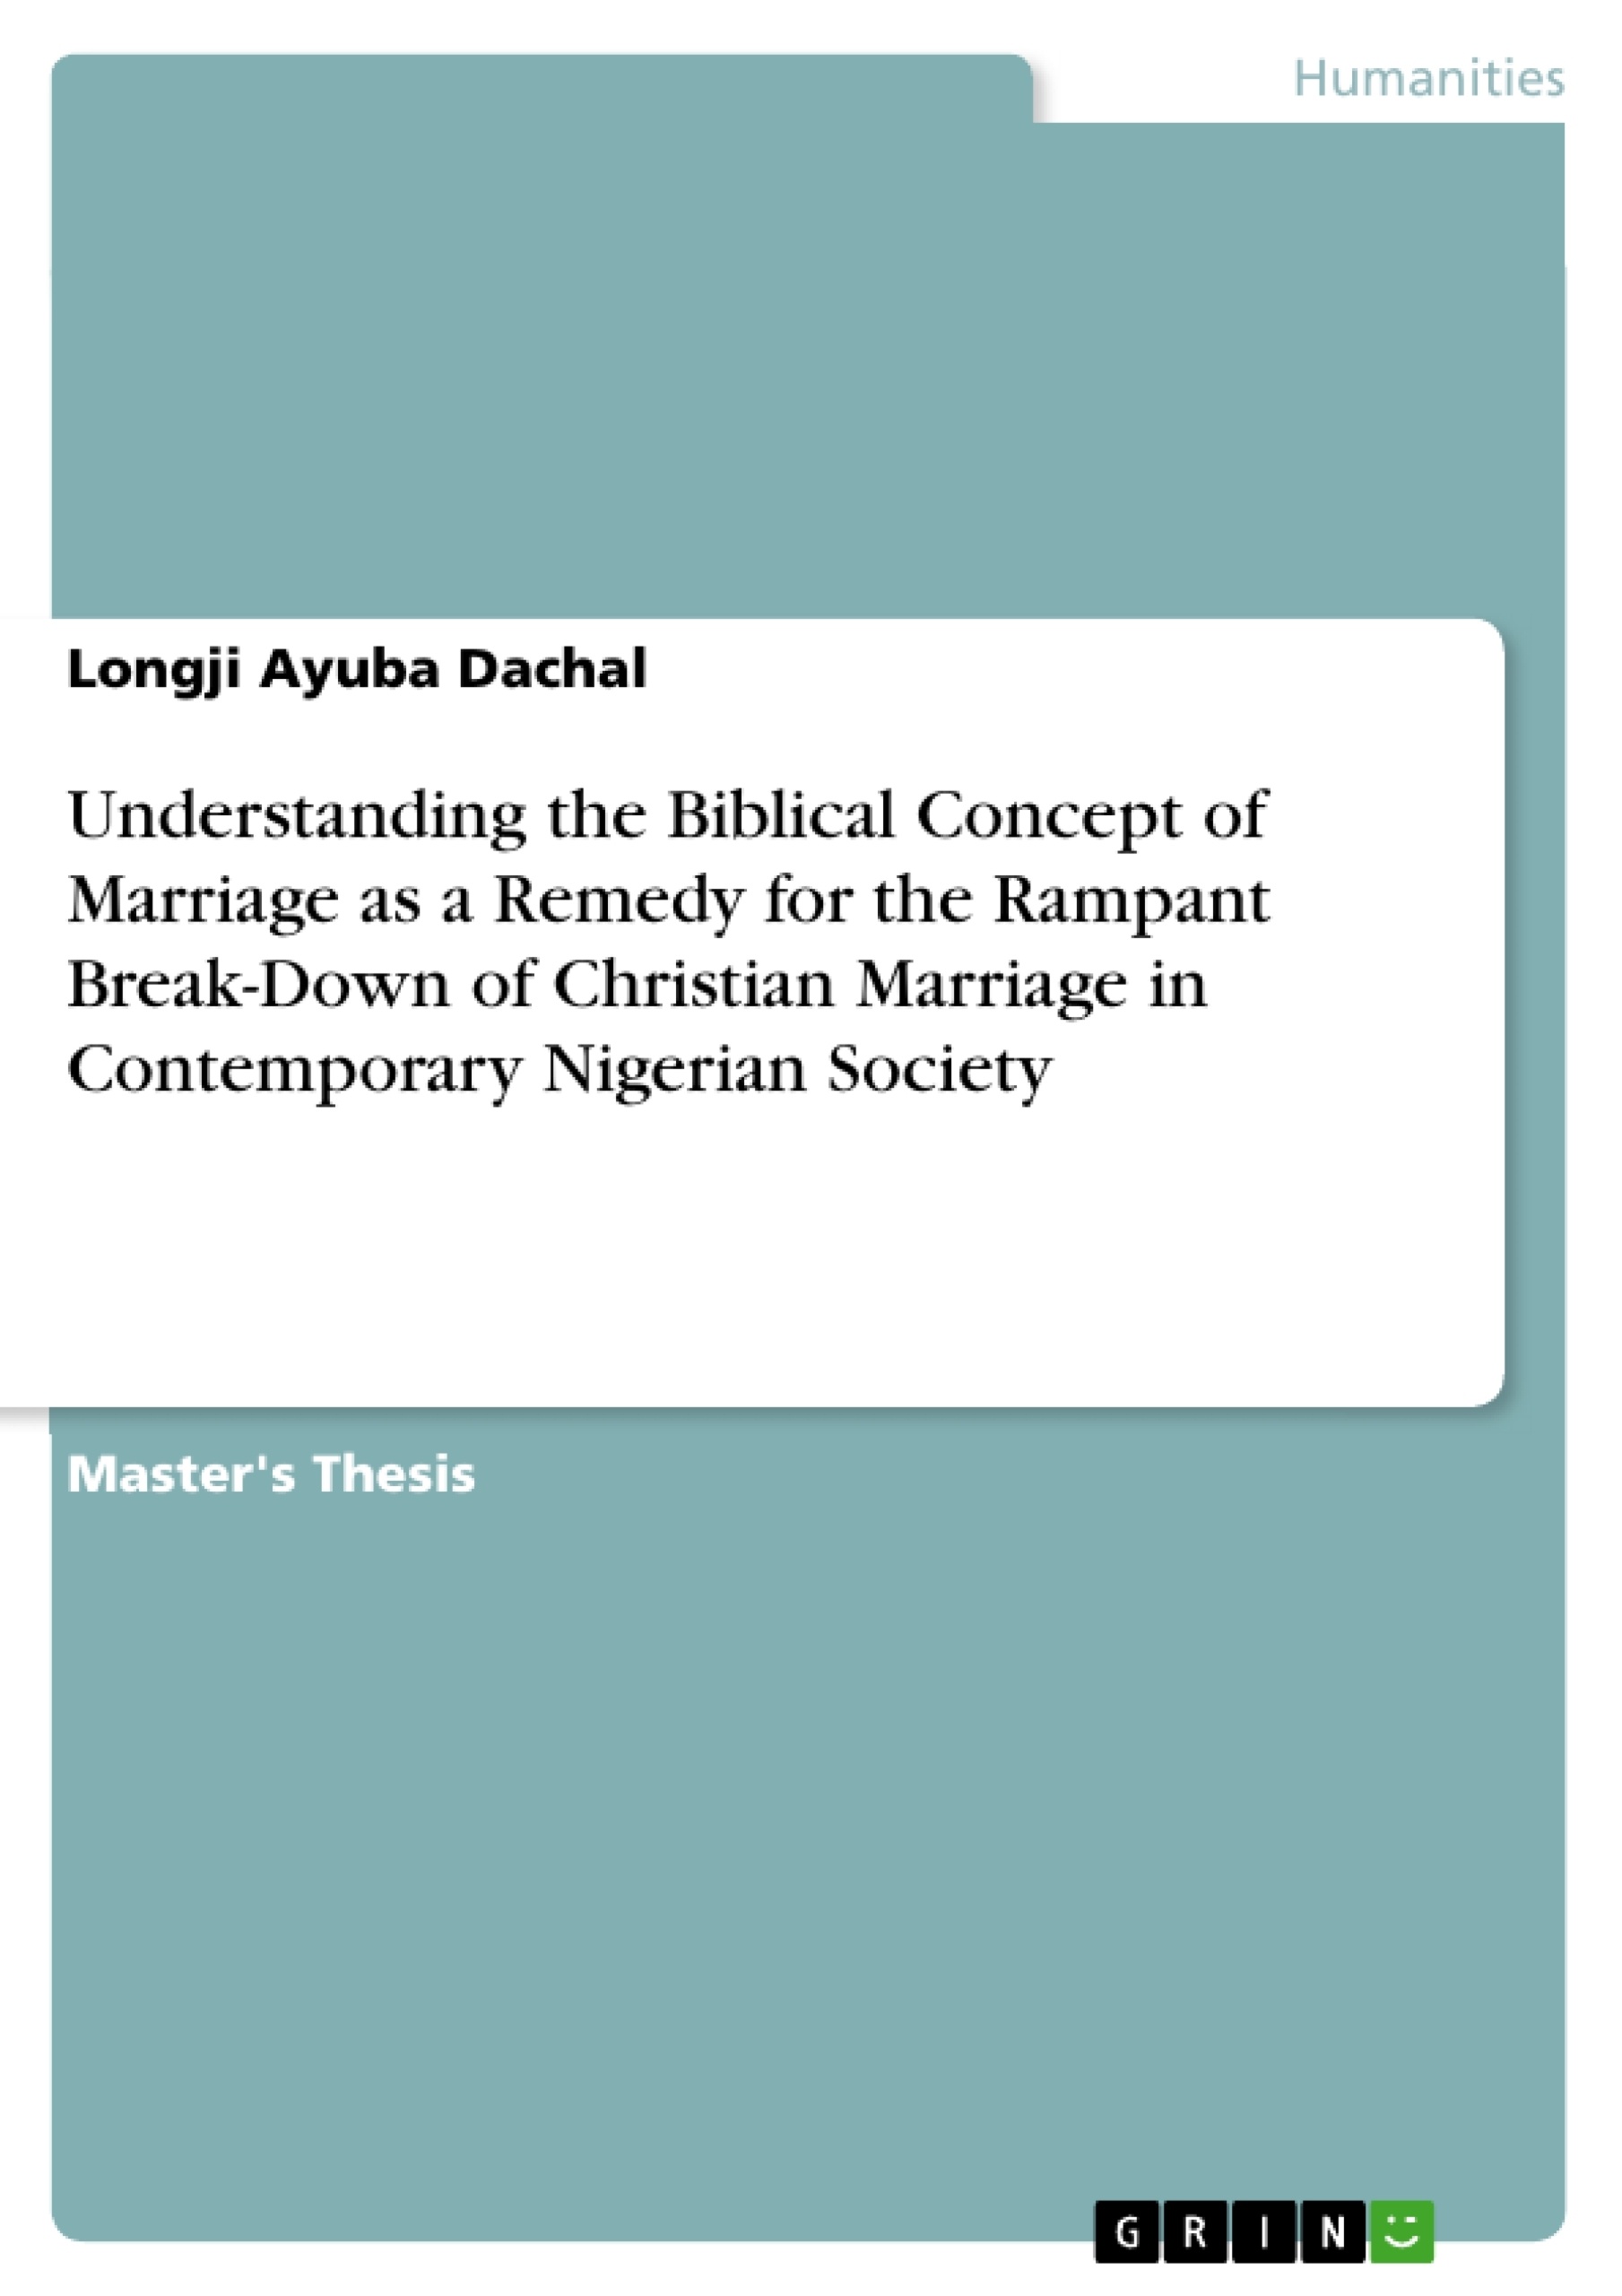 Title: Understanding the Biblical Concept of Marriage as a Remedy for the Rampant Break-Down of Christian Marriage in Contemporary Nigerian Society